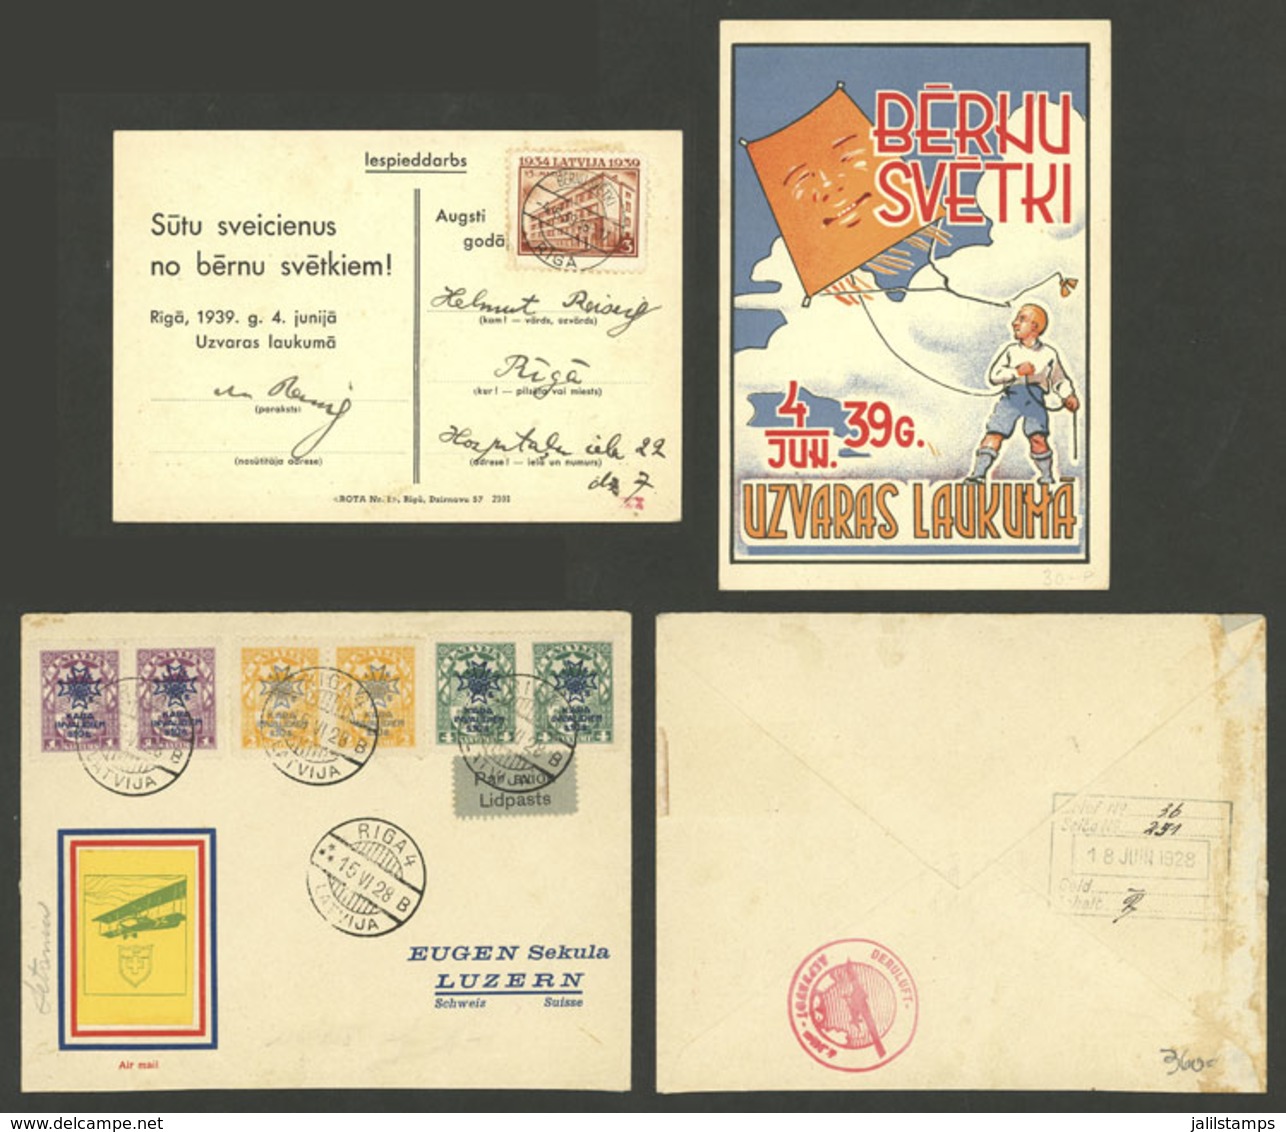 LATVIA: Cover Of 1928 And Card Of 1939, Interesting Marks And Frankings, VF Quality! - Letonia